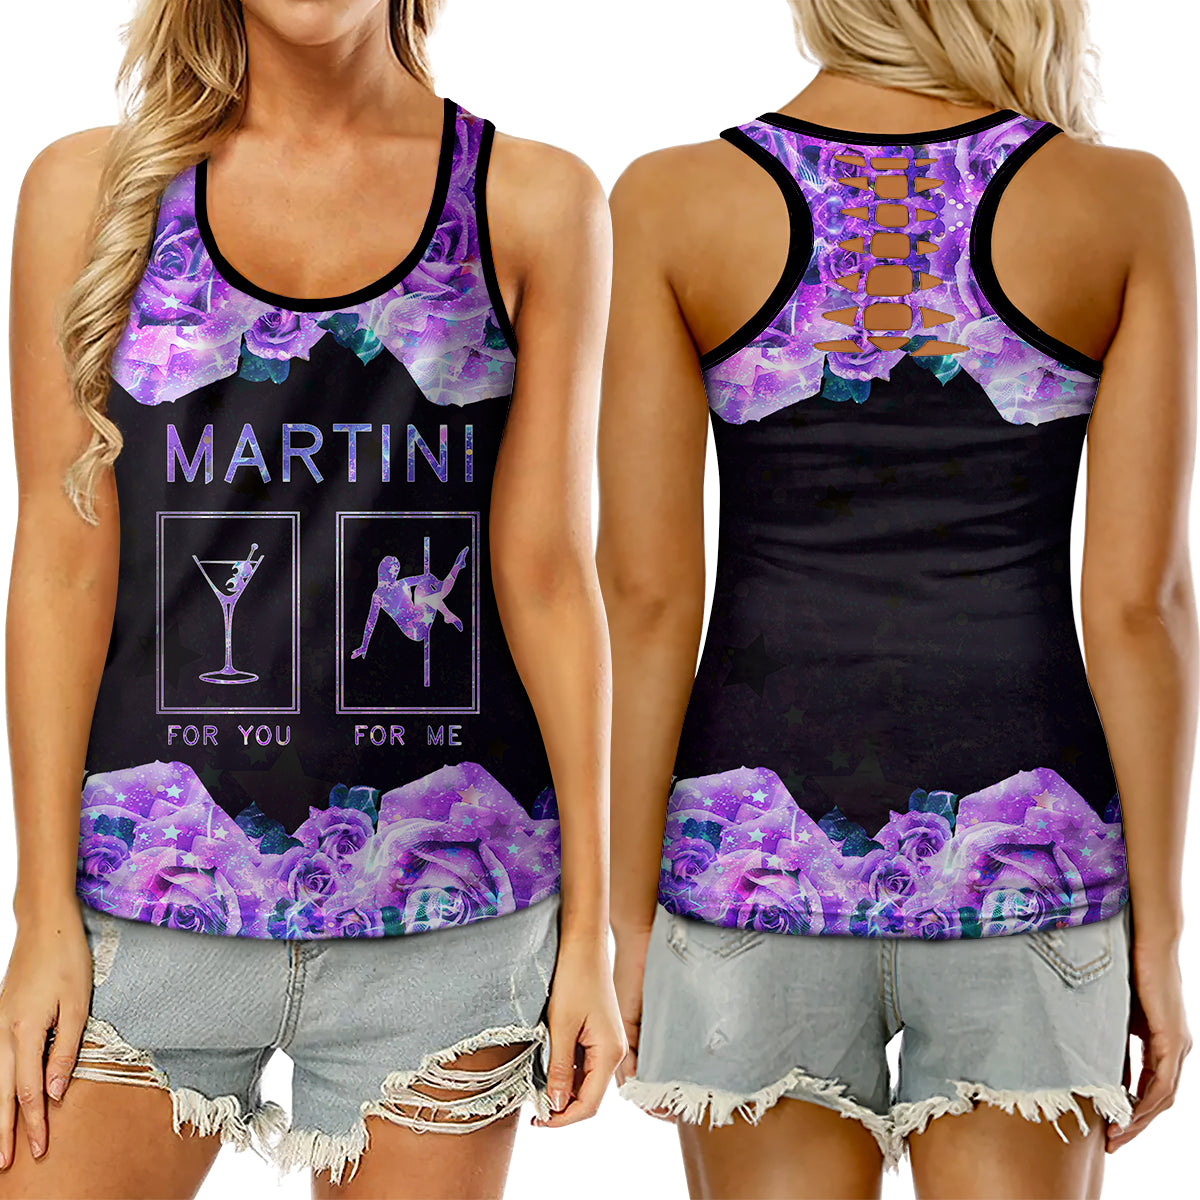 Pole Dance Martini For You And Me - Tank Top Hollow - Owls Matrix LTD